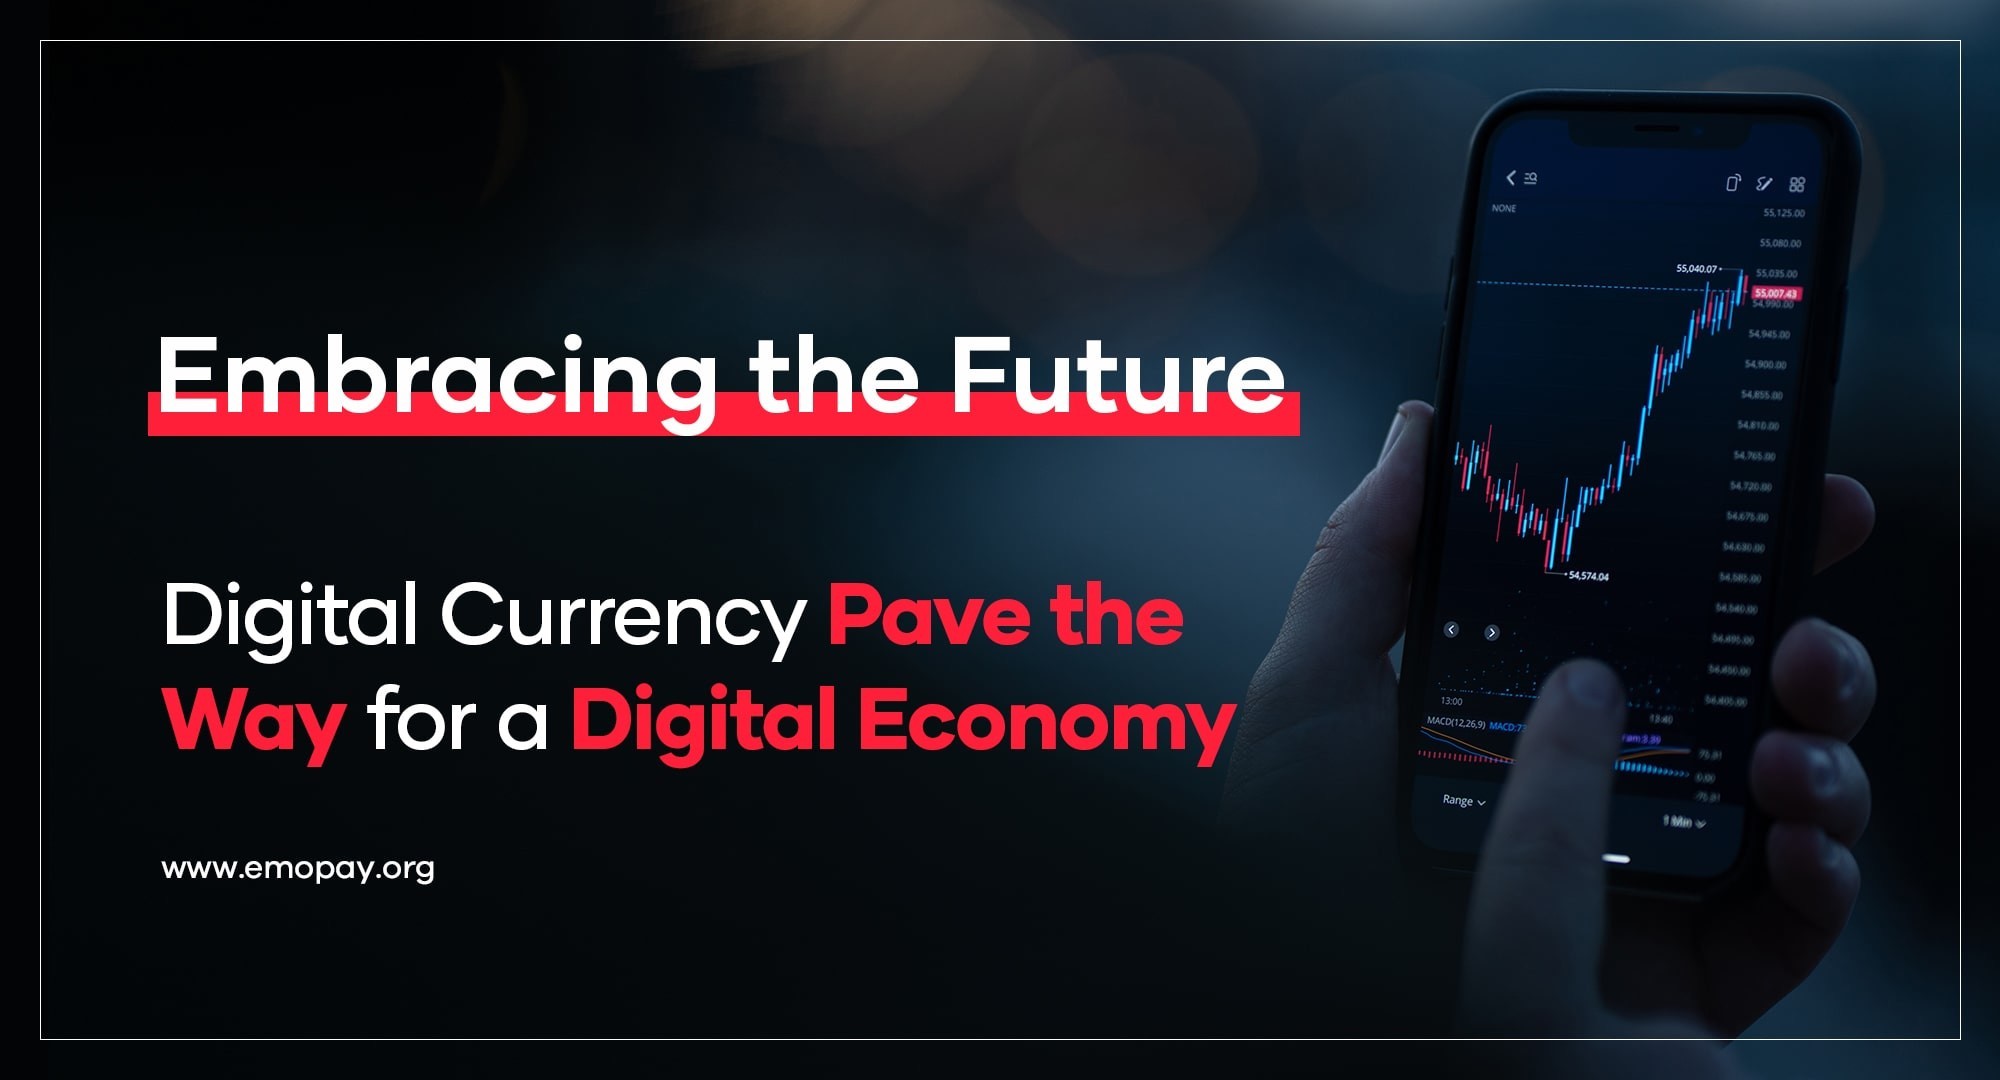 Embracing the Future Digital Currency pave the way for a digital economy